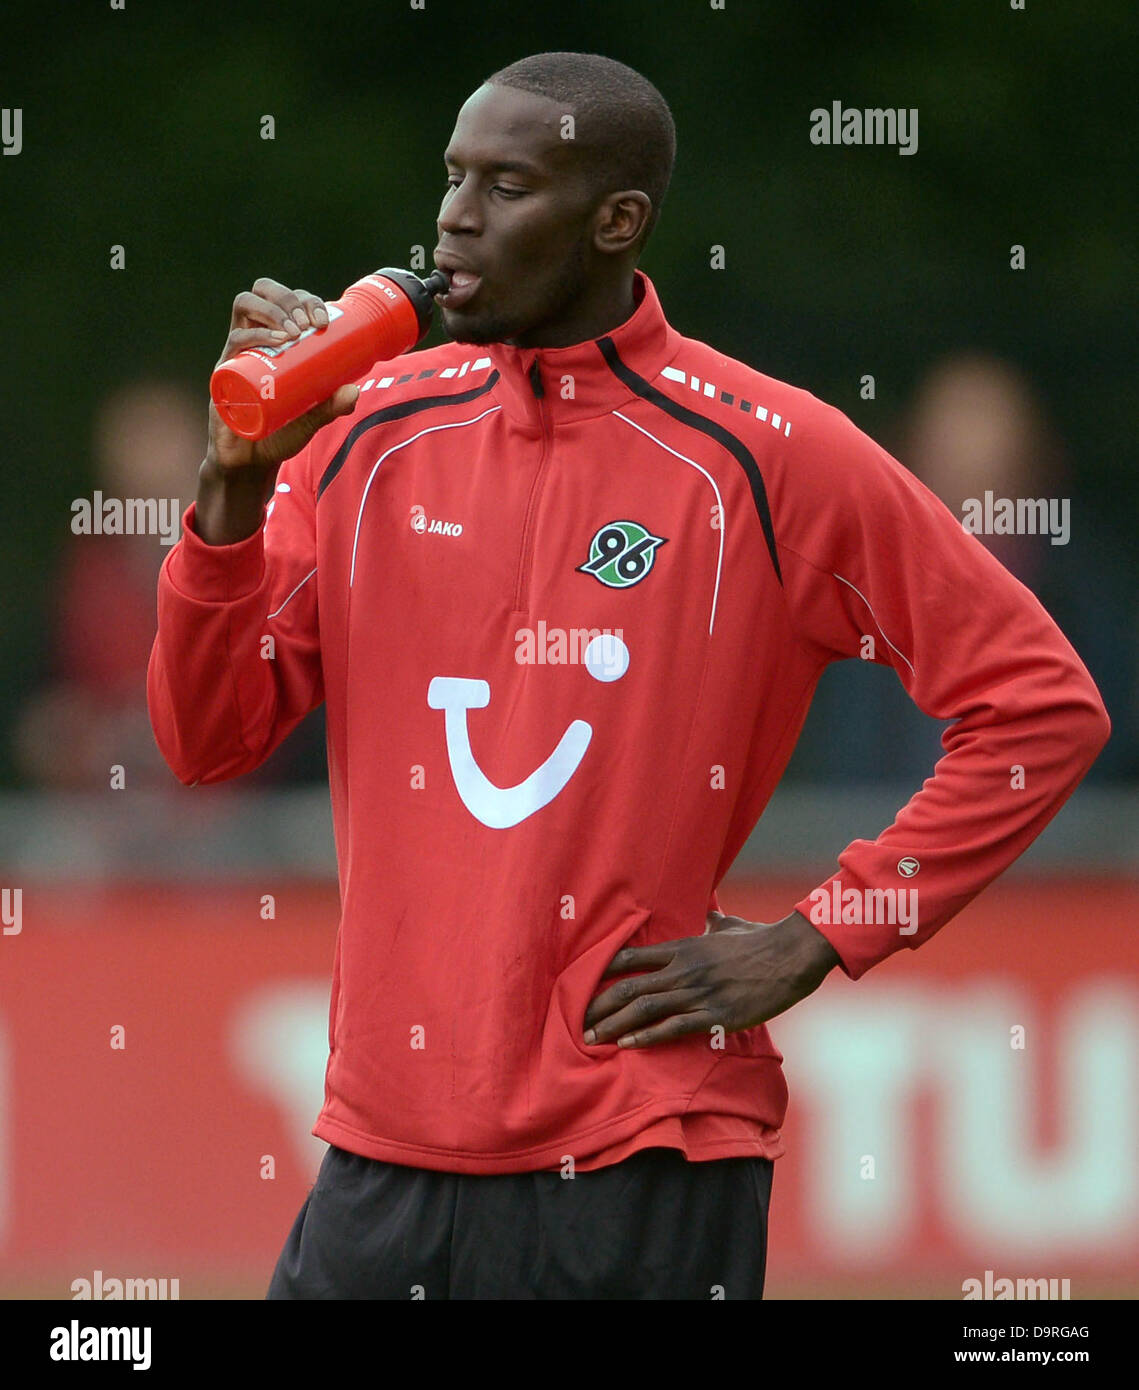 Salif Sane takes part in the first training session of the year with his team at the multi-sport facility next to ADW Arena in Hanover, Germany, 25 June 2013. Photo: PETER STEFFEN Stock Photo